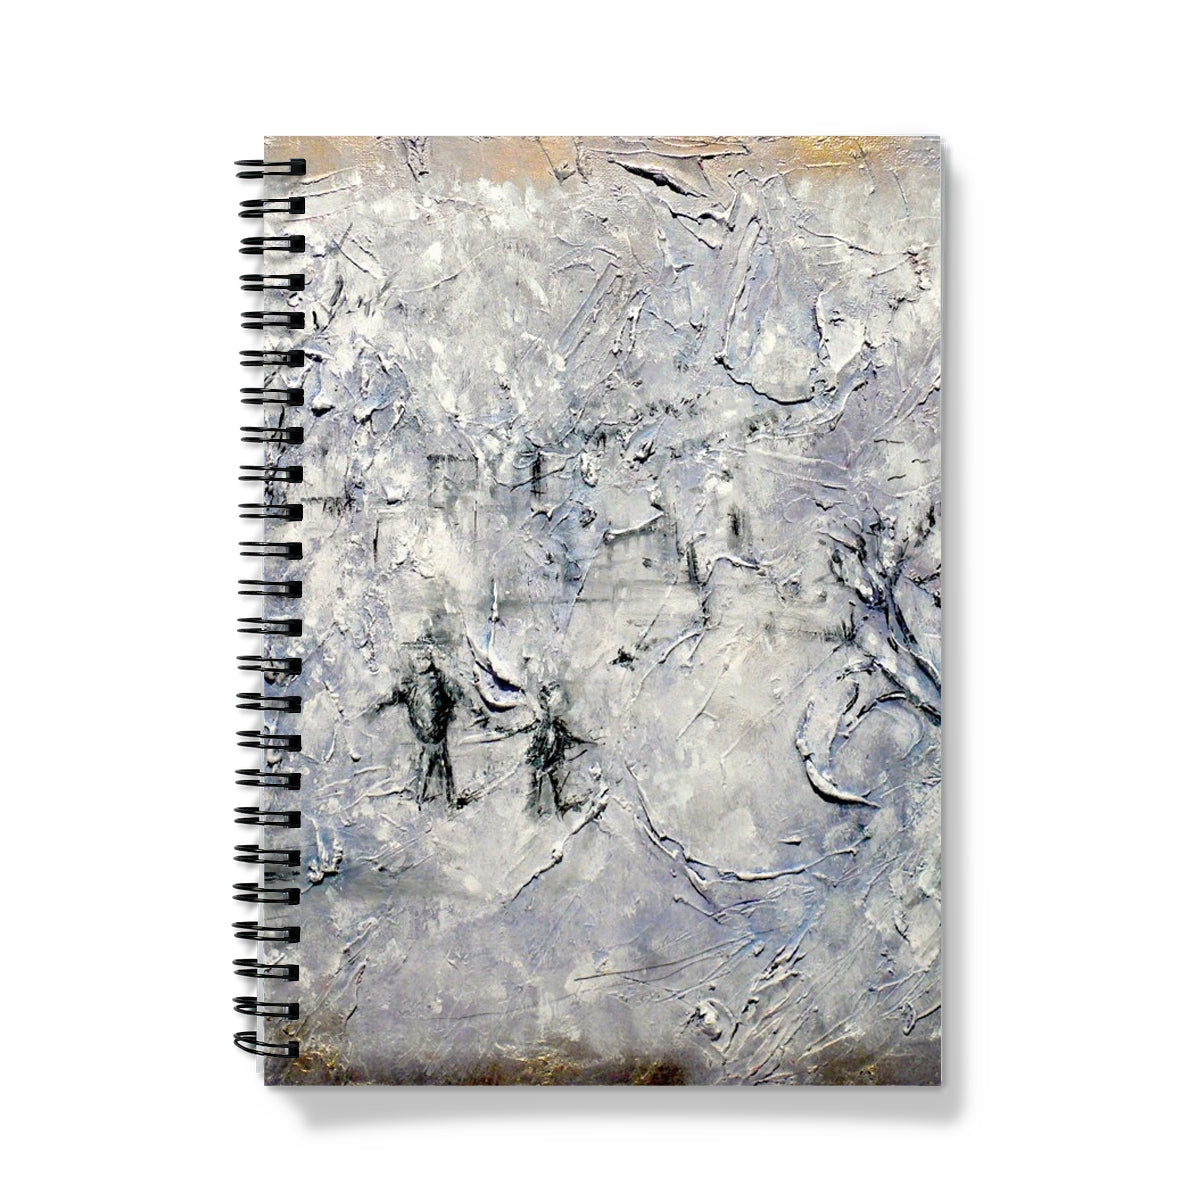 Father Daughter Snow Art Gifts Notebook-Journals & Notebooks-Abstract & Impressionistic Art Gallery-A4-Graph-Paintings, Prints, Homeware, Art Gifts From Scotland By Scottish Artist Kevin Hunter